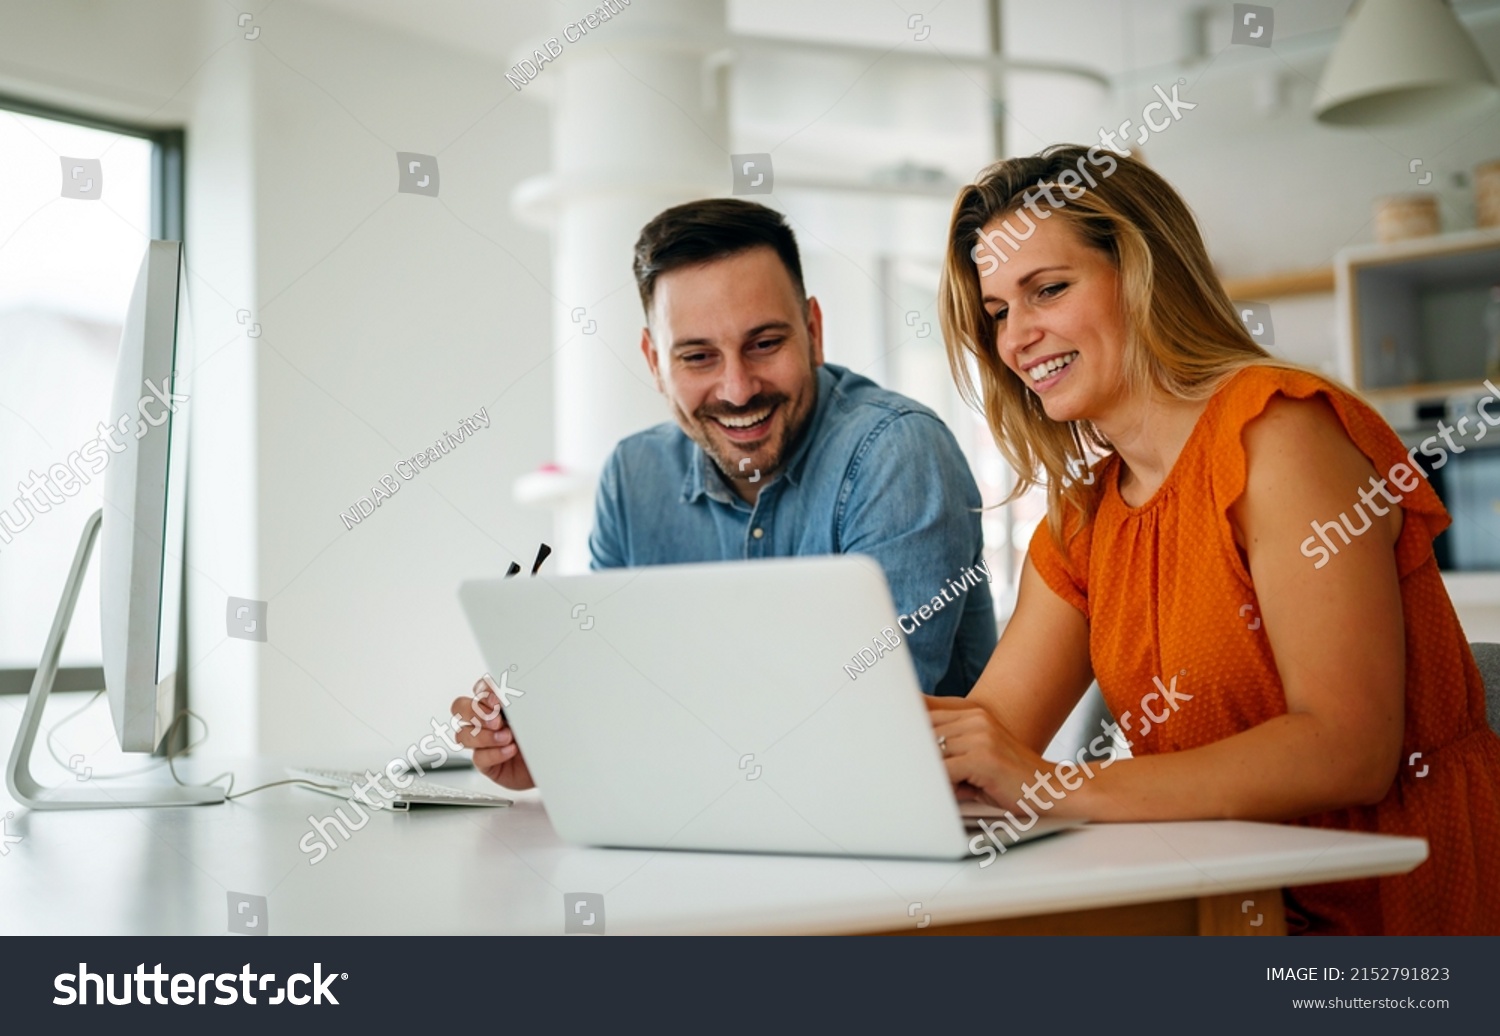 Portrait of success business people working together in home office. Couple teamwork startup concept #2152791823